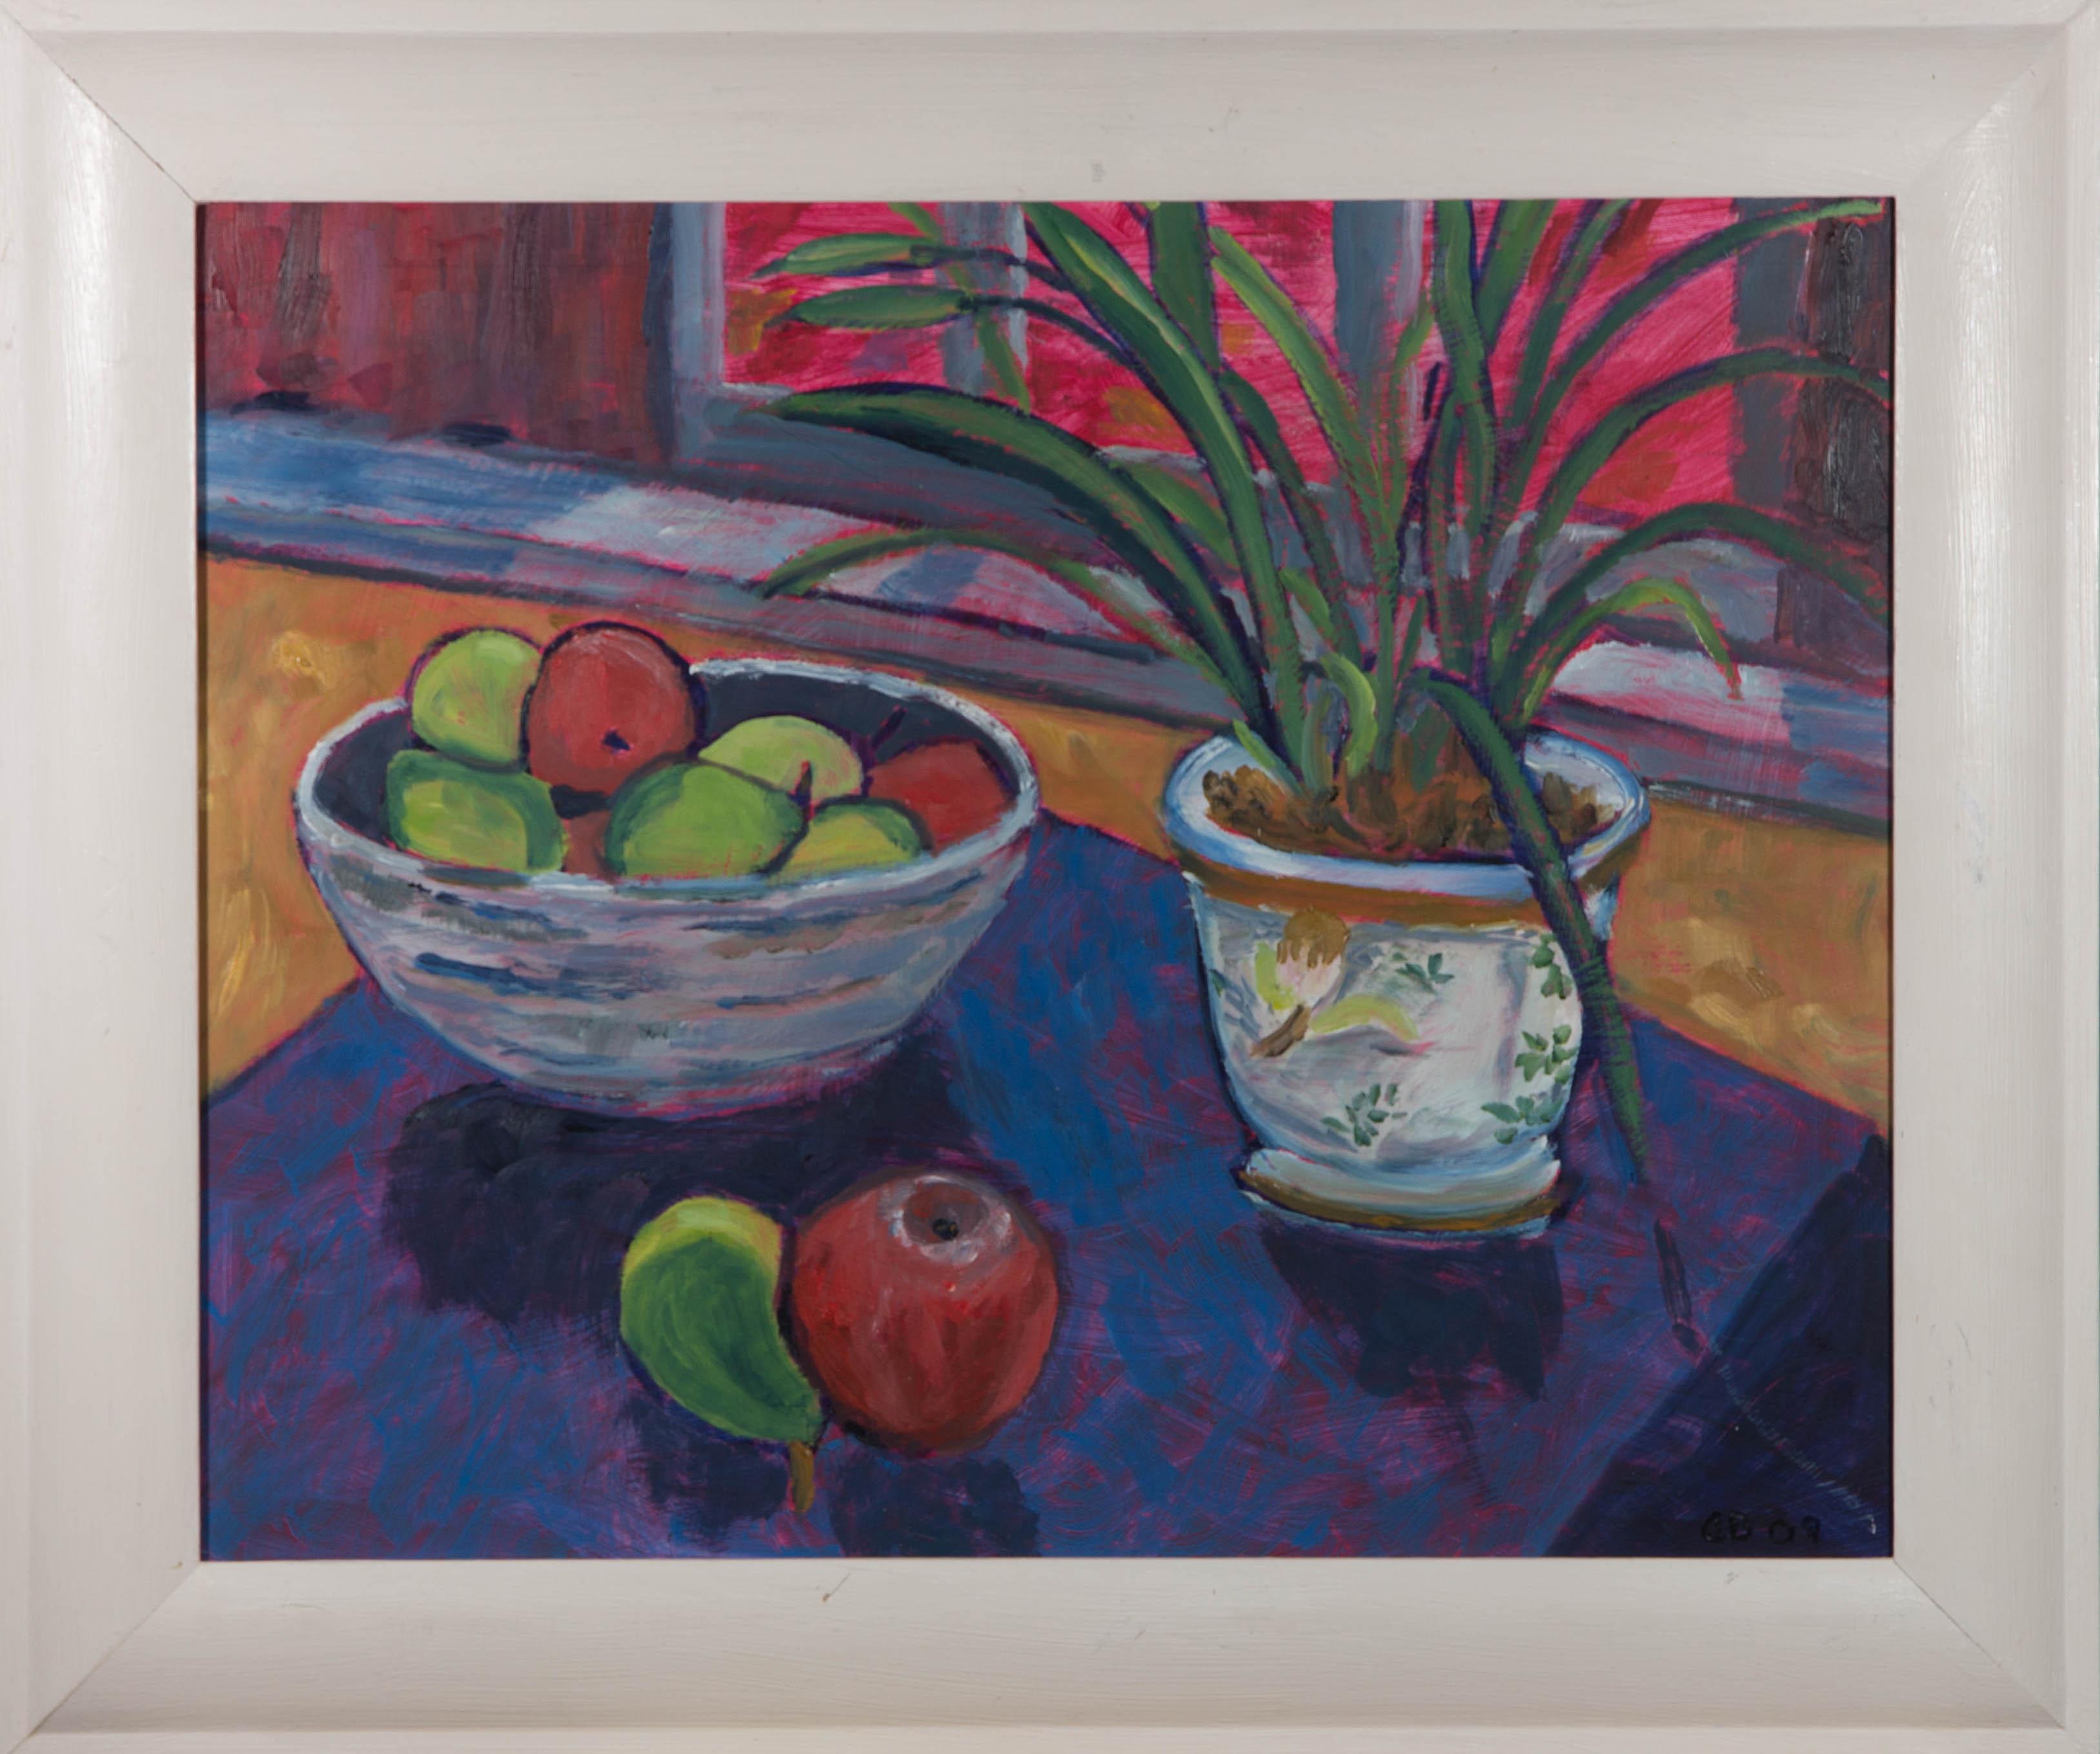 A bright potent palette is used to depict a still life to glorious Fauvist-esque effect.

Signed and dated in the bottom right-hand corner.

Well presented in a white wooden frame.

On Board.